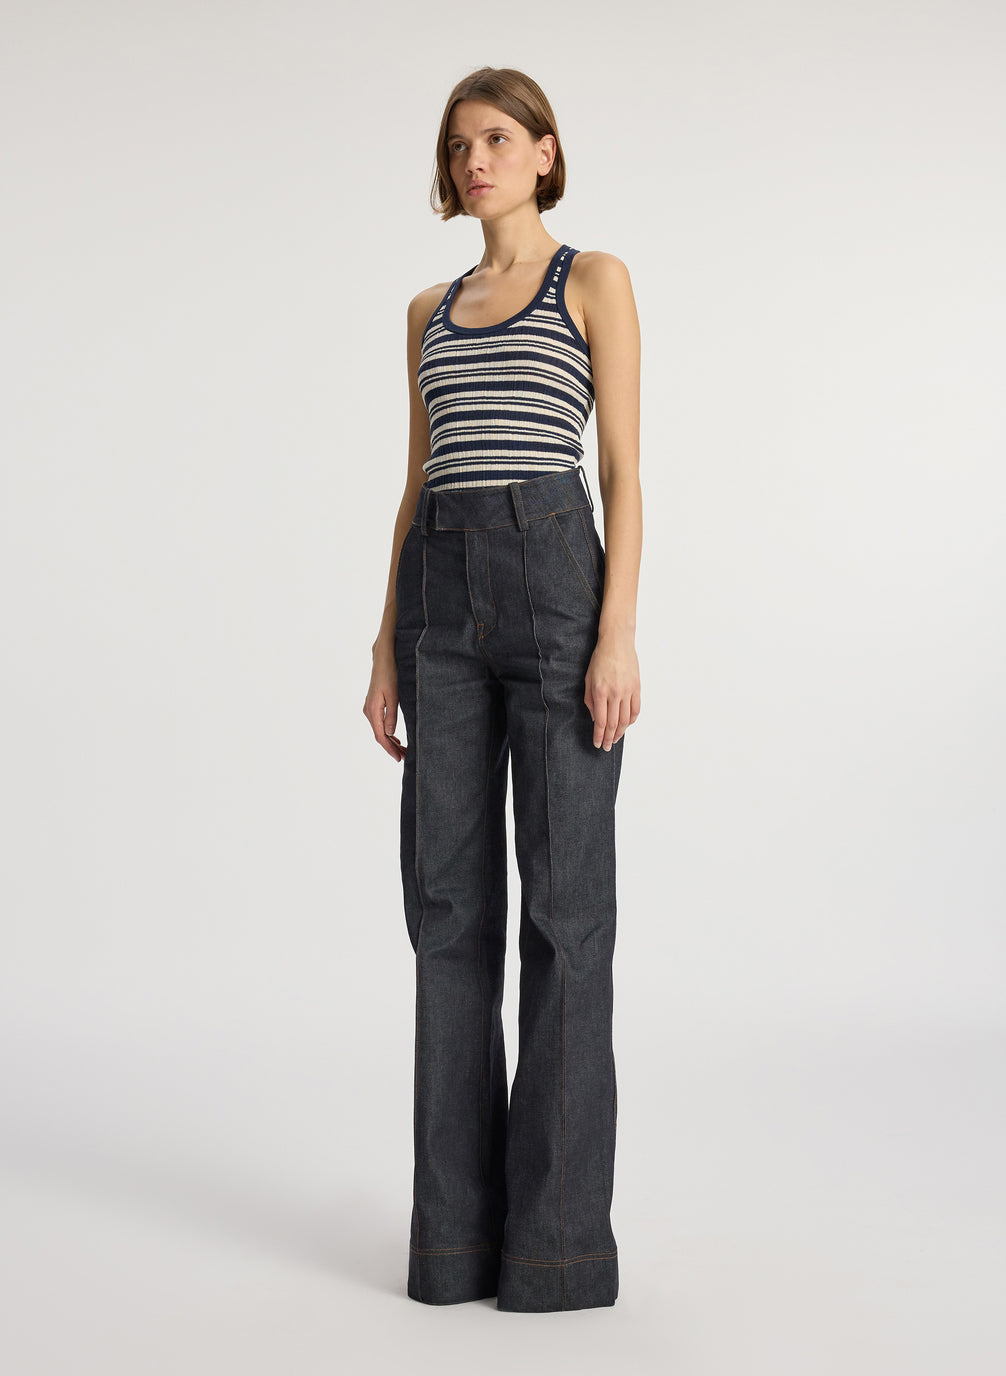 side view of woman wearing navy blue striped tank top and dark wash raw denim jeans